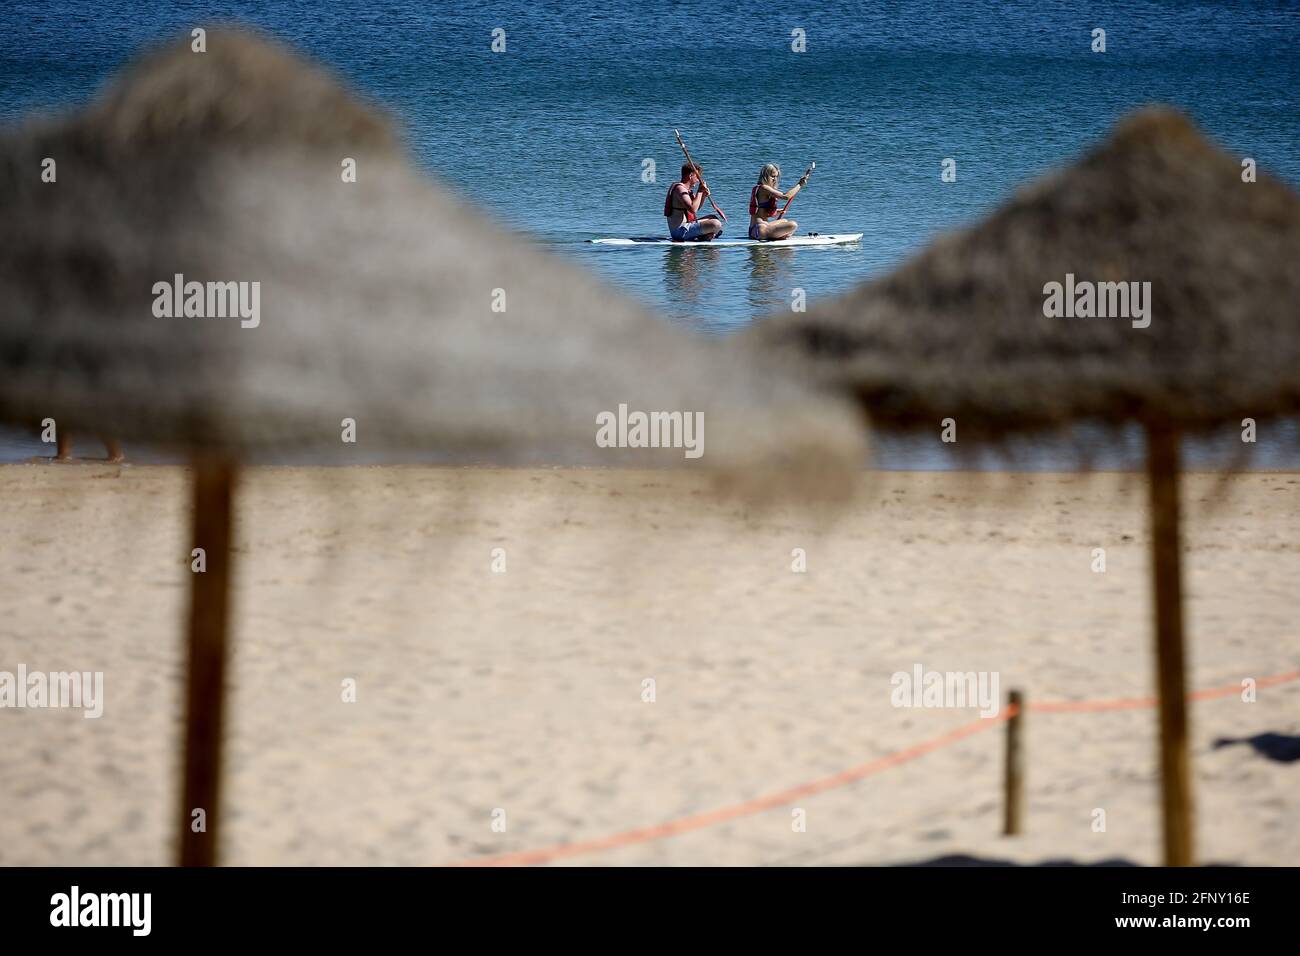 Lisbon. 19th May, 2021. People take kayaks in Cascais, Portugal on May 19, 2021. British vacationers began arriving in large numbers in Portugal after governments of the two countries eased their COVID-19 pandemic travel restrictions. Credit: Pedro Fiuza/Xinhua/Alamy Live News Stock Photo